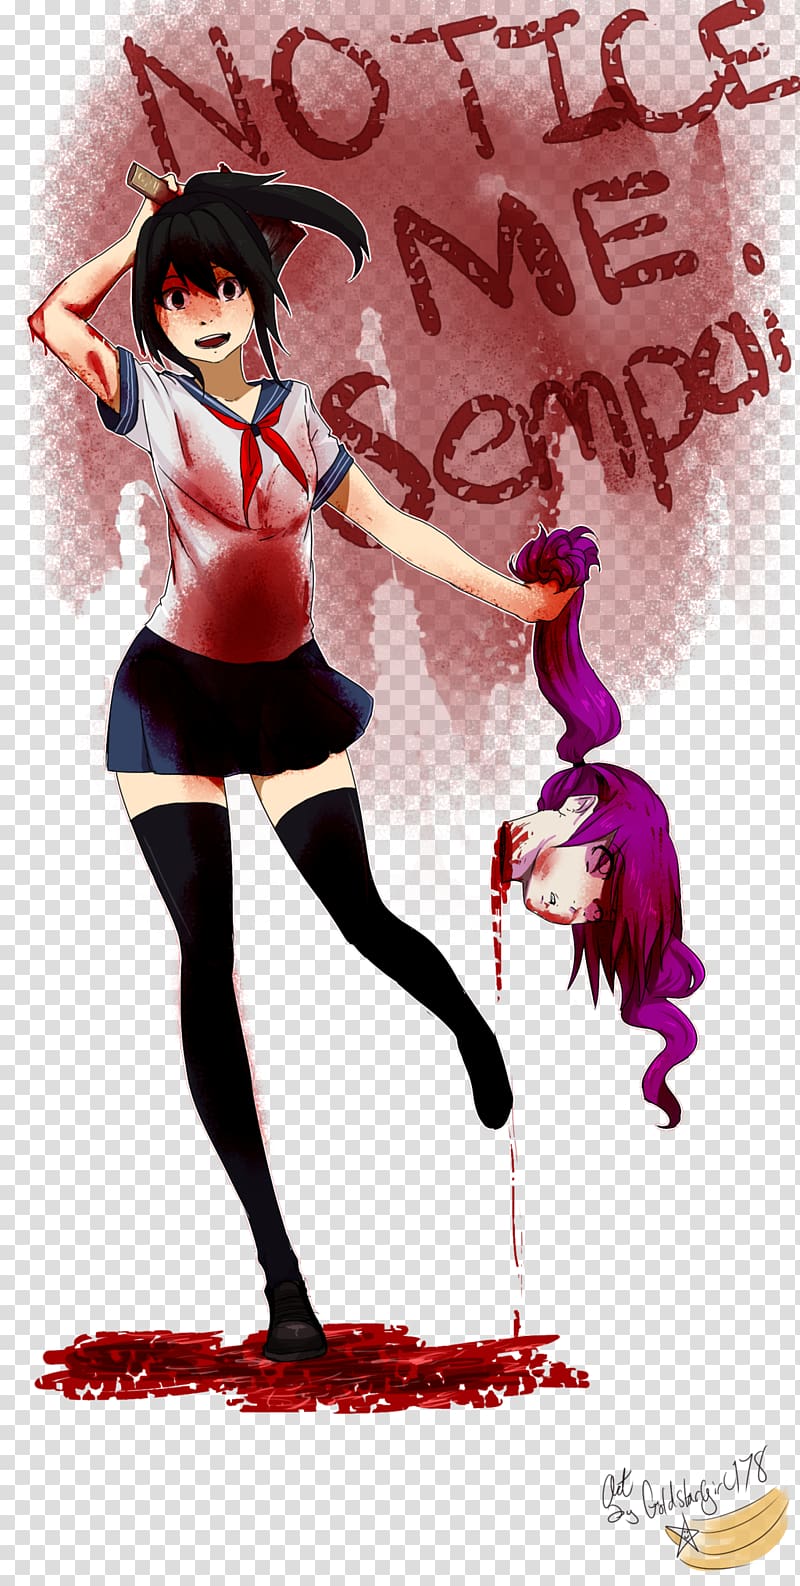 Yandere simulator all characters - zzseoliseo